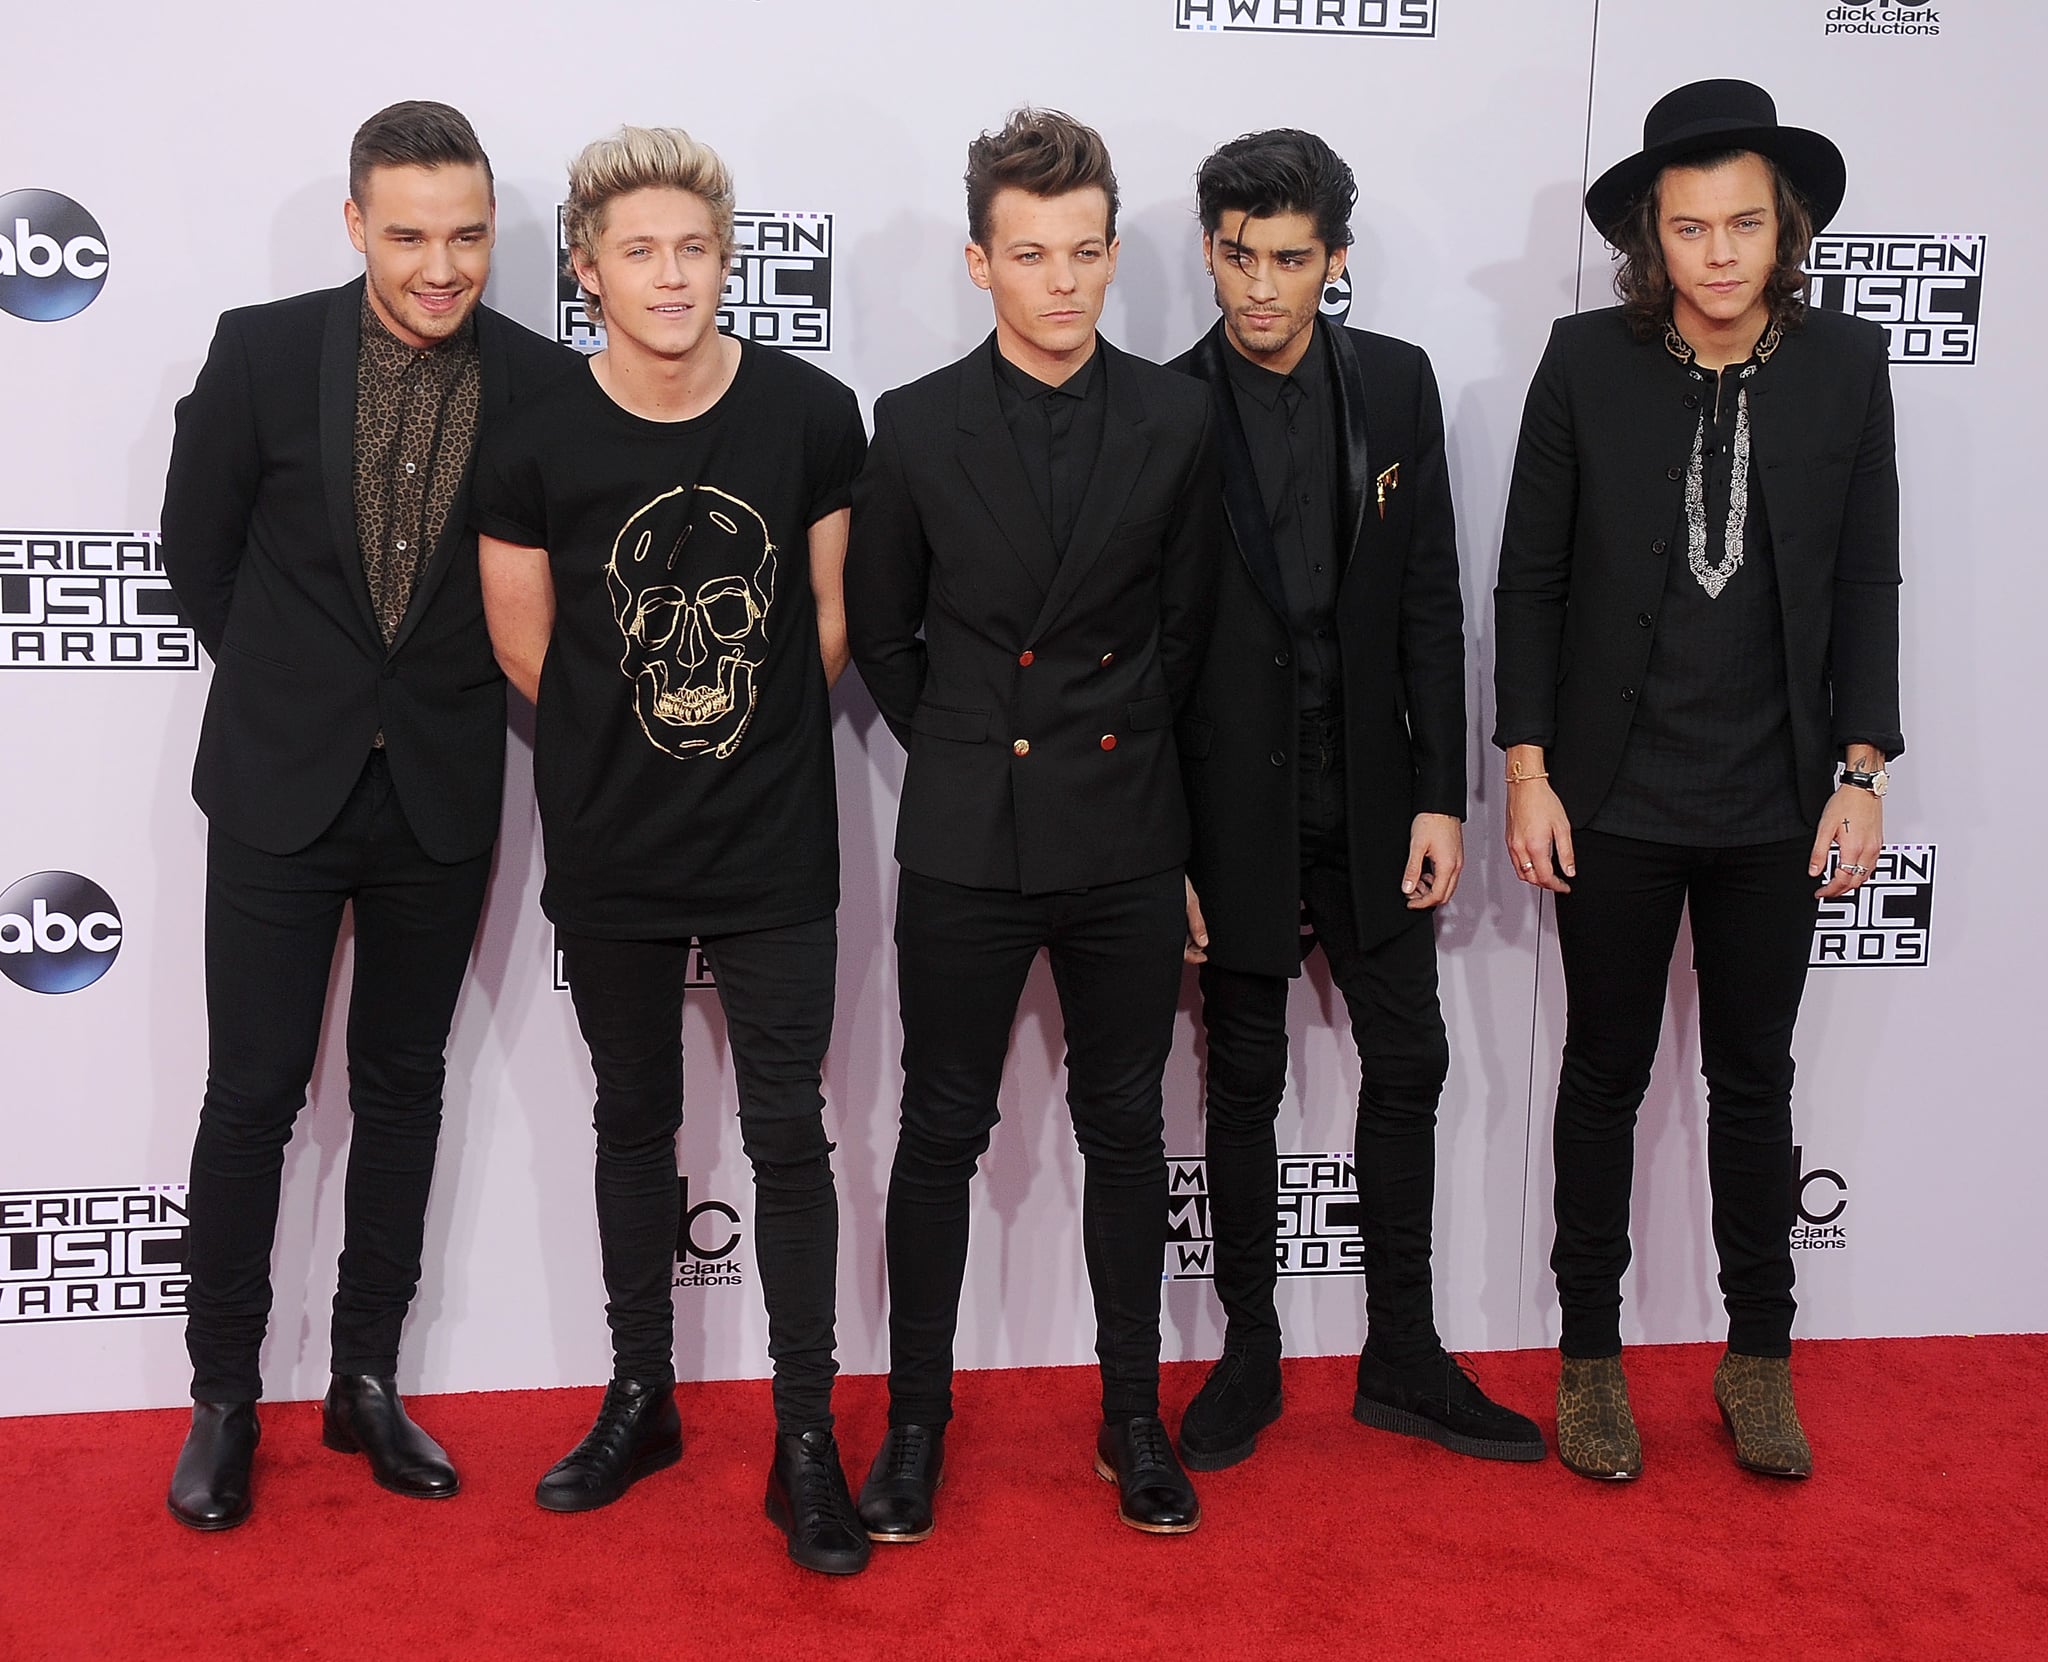 LOS ANGELES, CA - NOVEMBER 23:  Musicians Liam Payne, Niall Horan, Louis Tomlinson, Zayn Malik and Harry Styles of One Direction arrive at the 2014 American Music Awards at Nokia Theatre L.A. Live on November 23, 2014 in Los Angeles, California.  (Photo by Gregg DeGuire/WireImage)